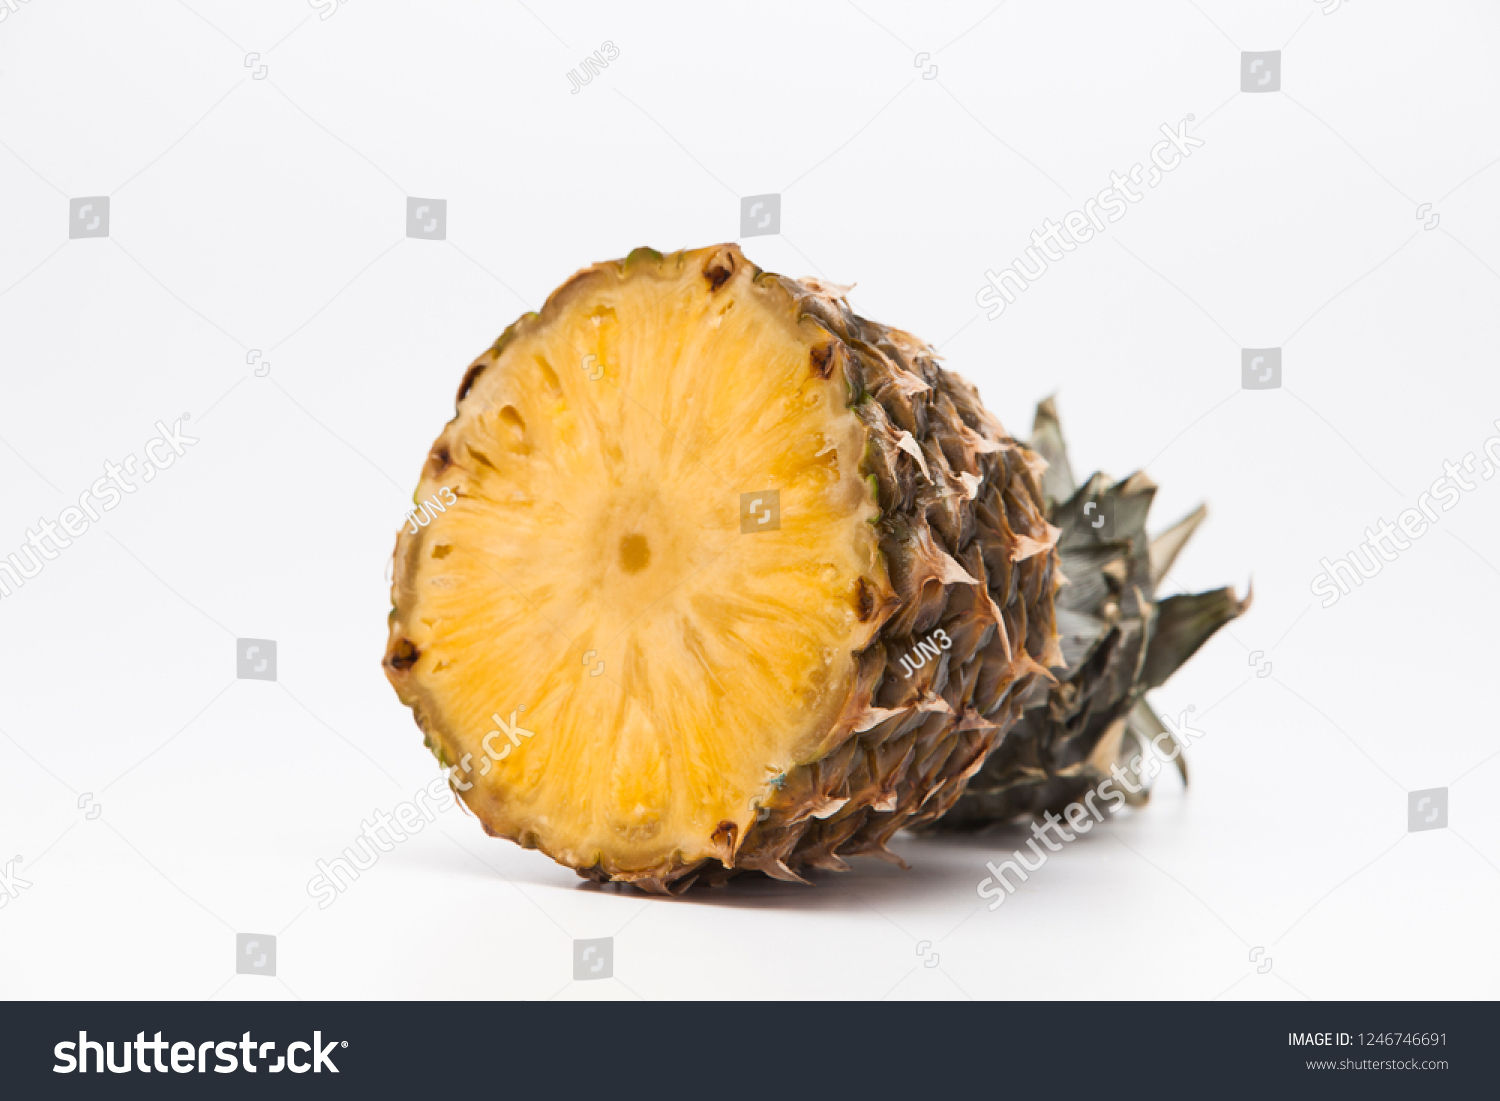 Pineapple Cross Section Isolated On White Stock Photo